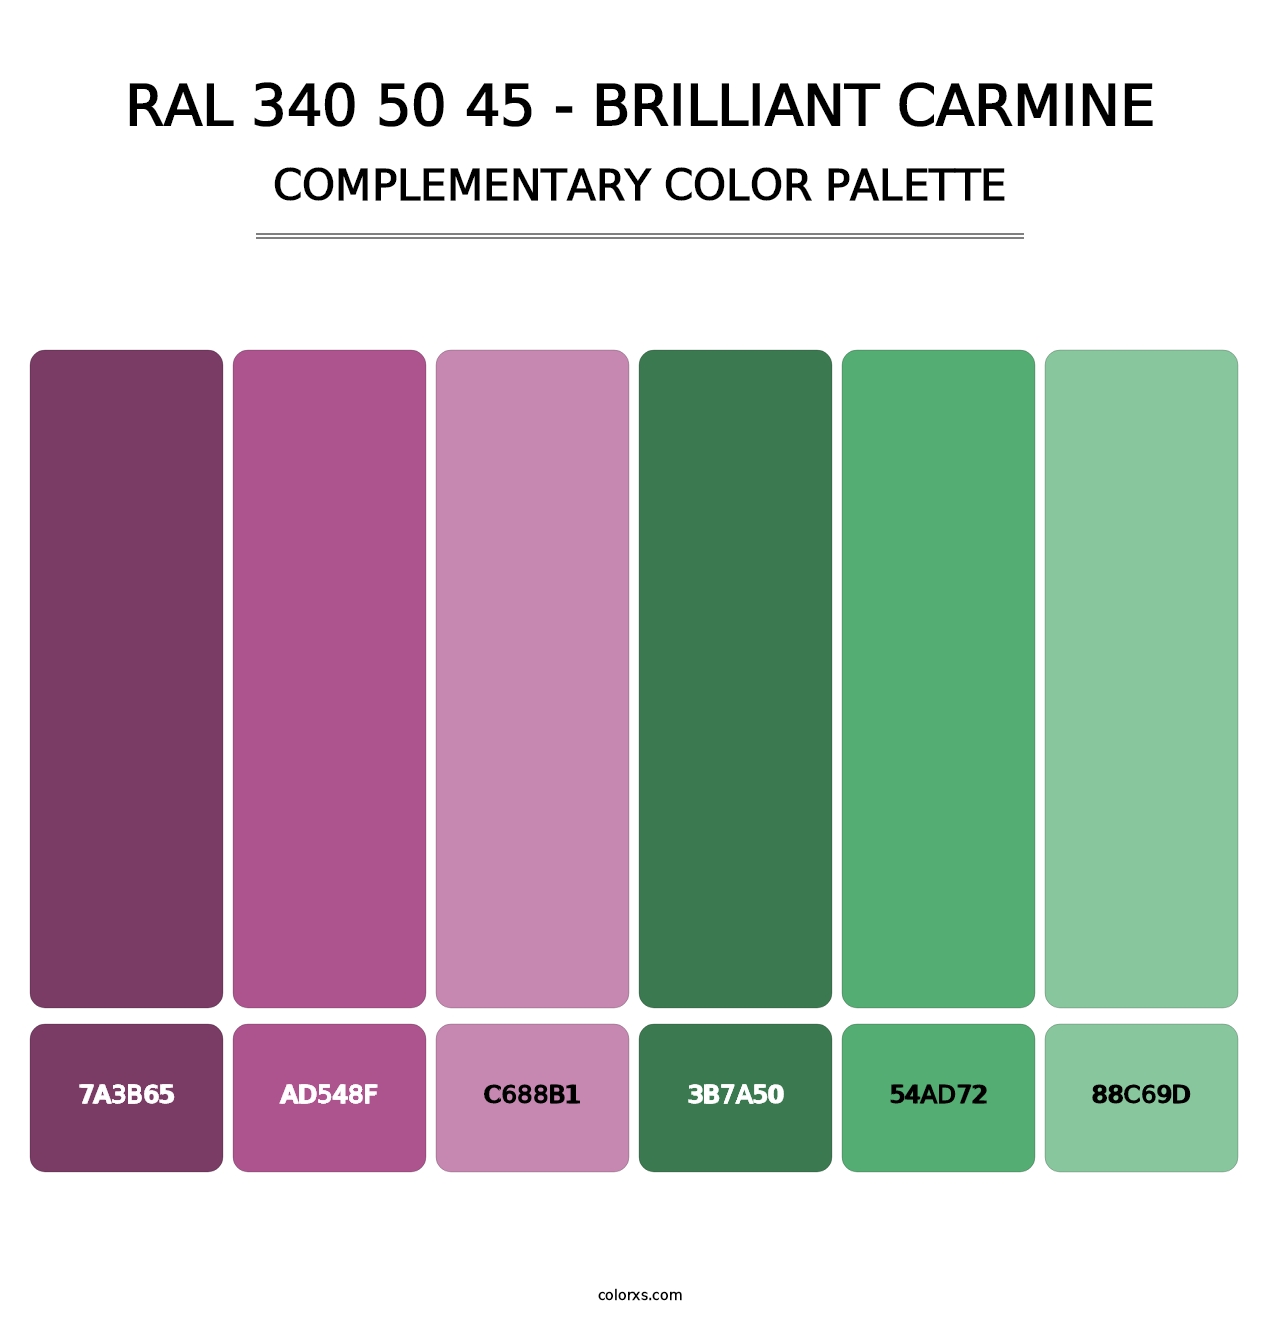 RAL 340 50 45 - Brilliant Carmine - Complementary Color Palette